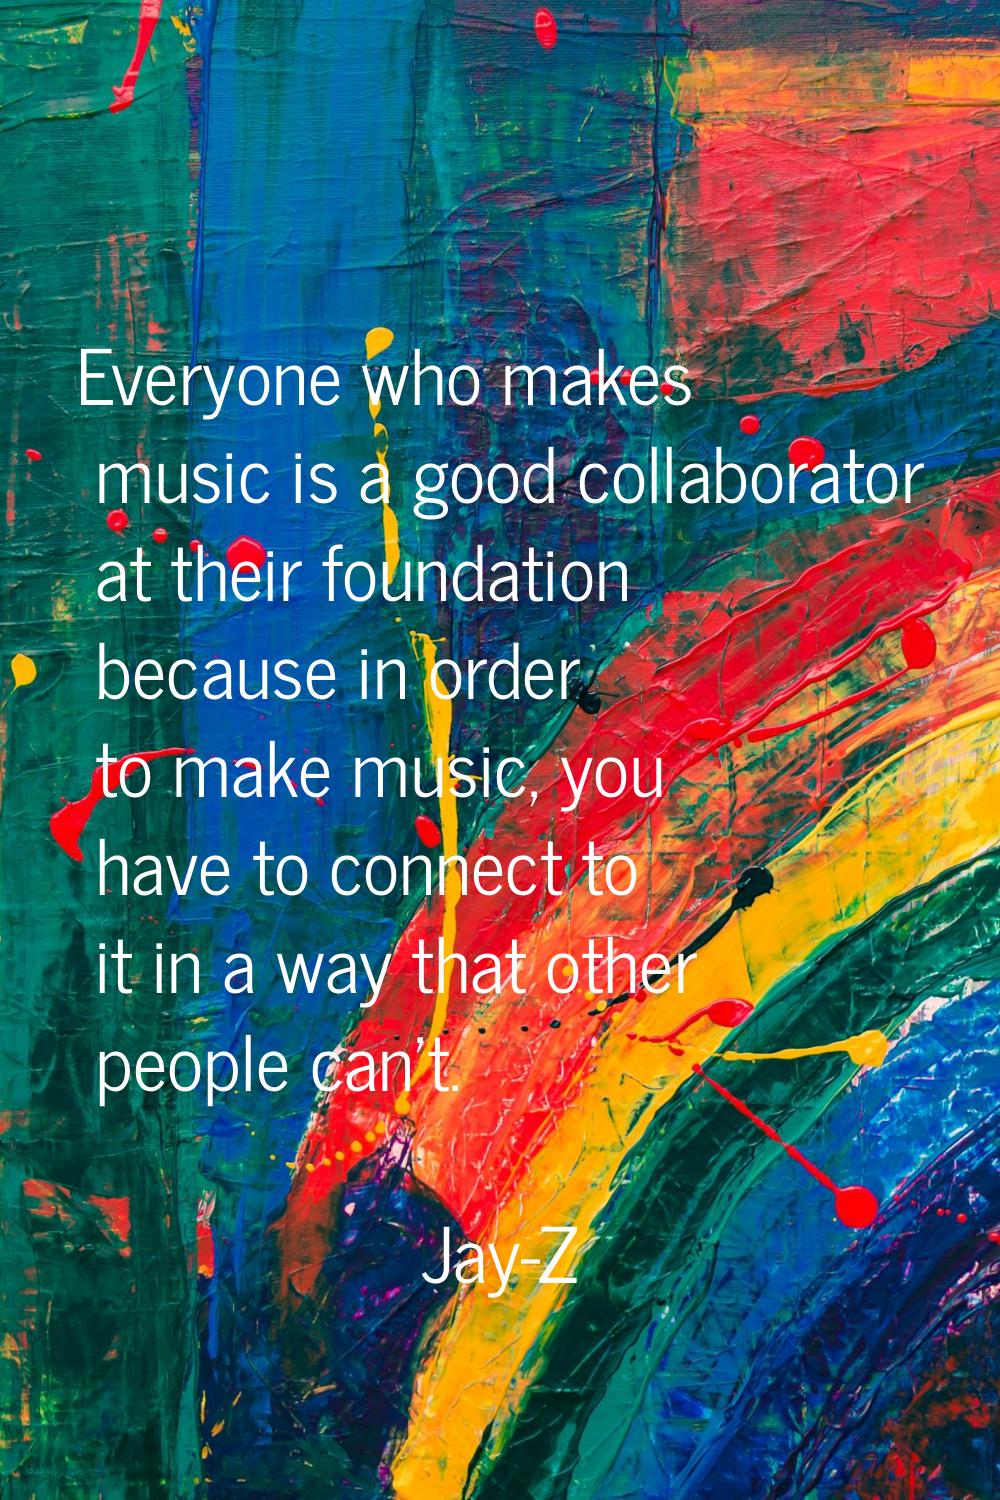 Everyone who makes music is a good collaborator at their foundation because in order to make music,